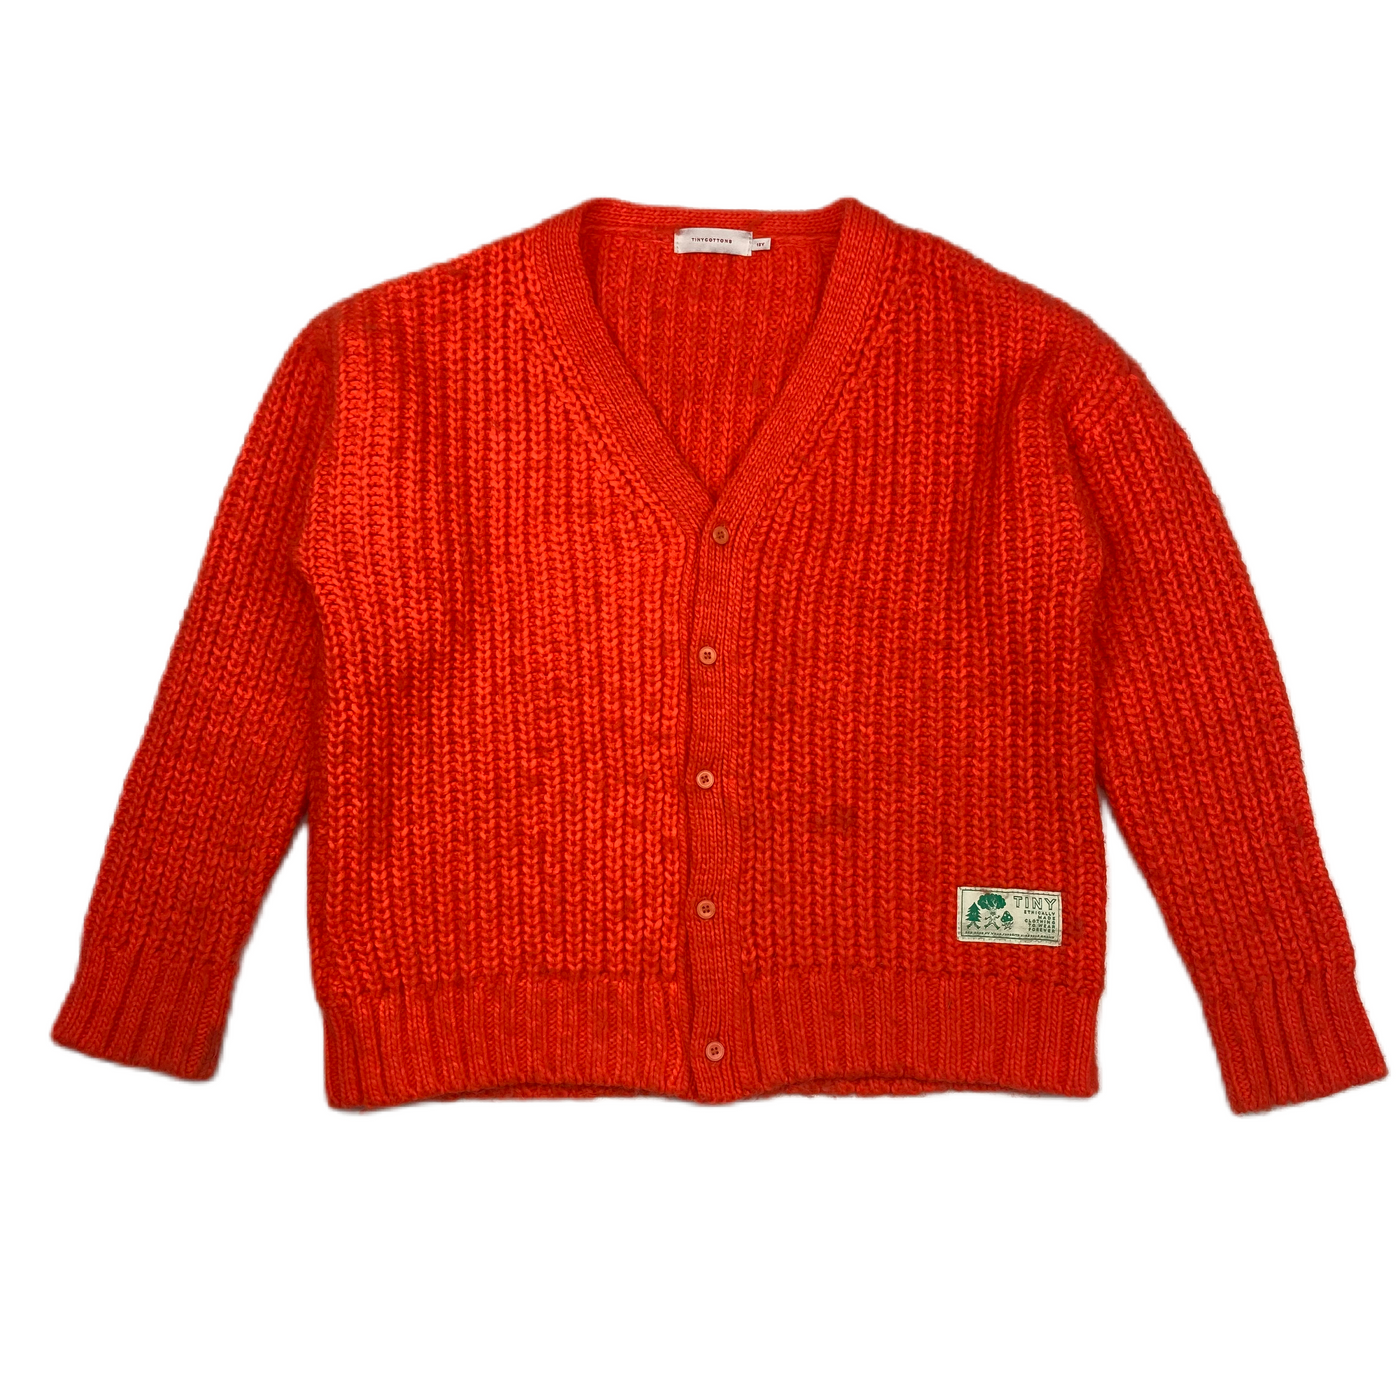 Tiny Cottons - Cardigan fire red 12y